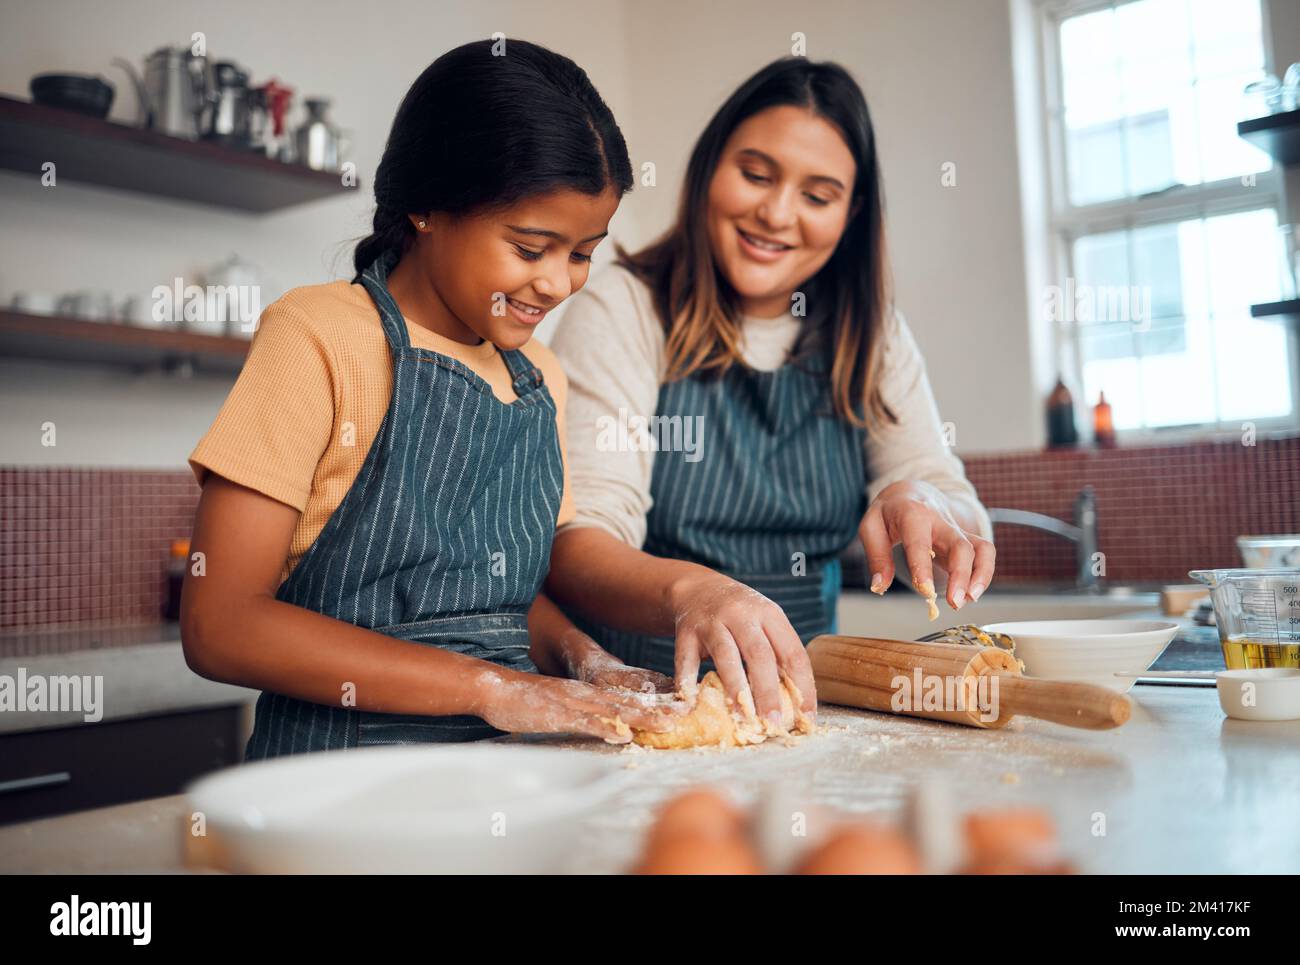 https://c8.alamy.com/comp/2M417KF/baking-family-and-love-with-a-daughter-and-mother-teaching-a-girl-about-cooking-baked-goods-in-a-kitchen-food-children-and-learning-with-an-indian-2M417KF.jpg